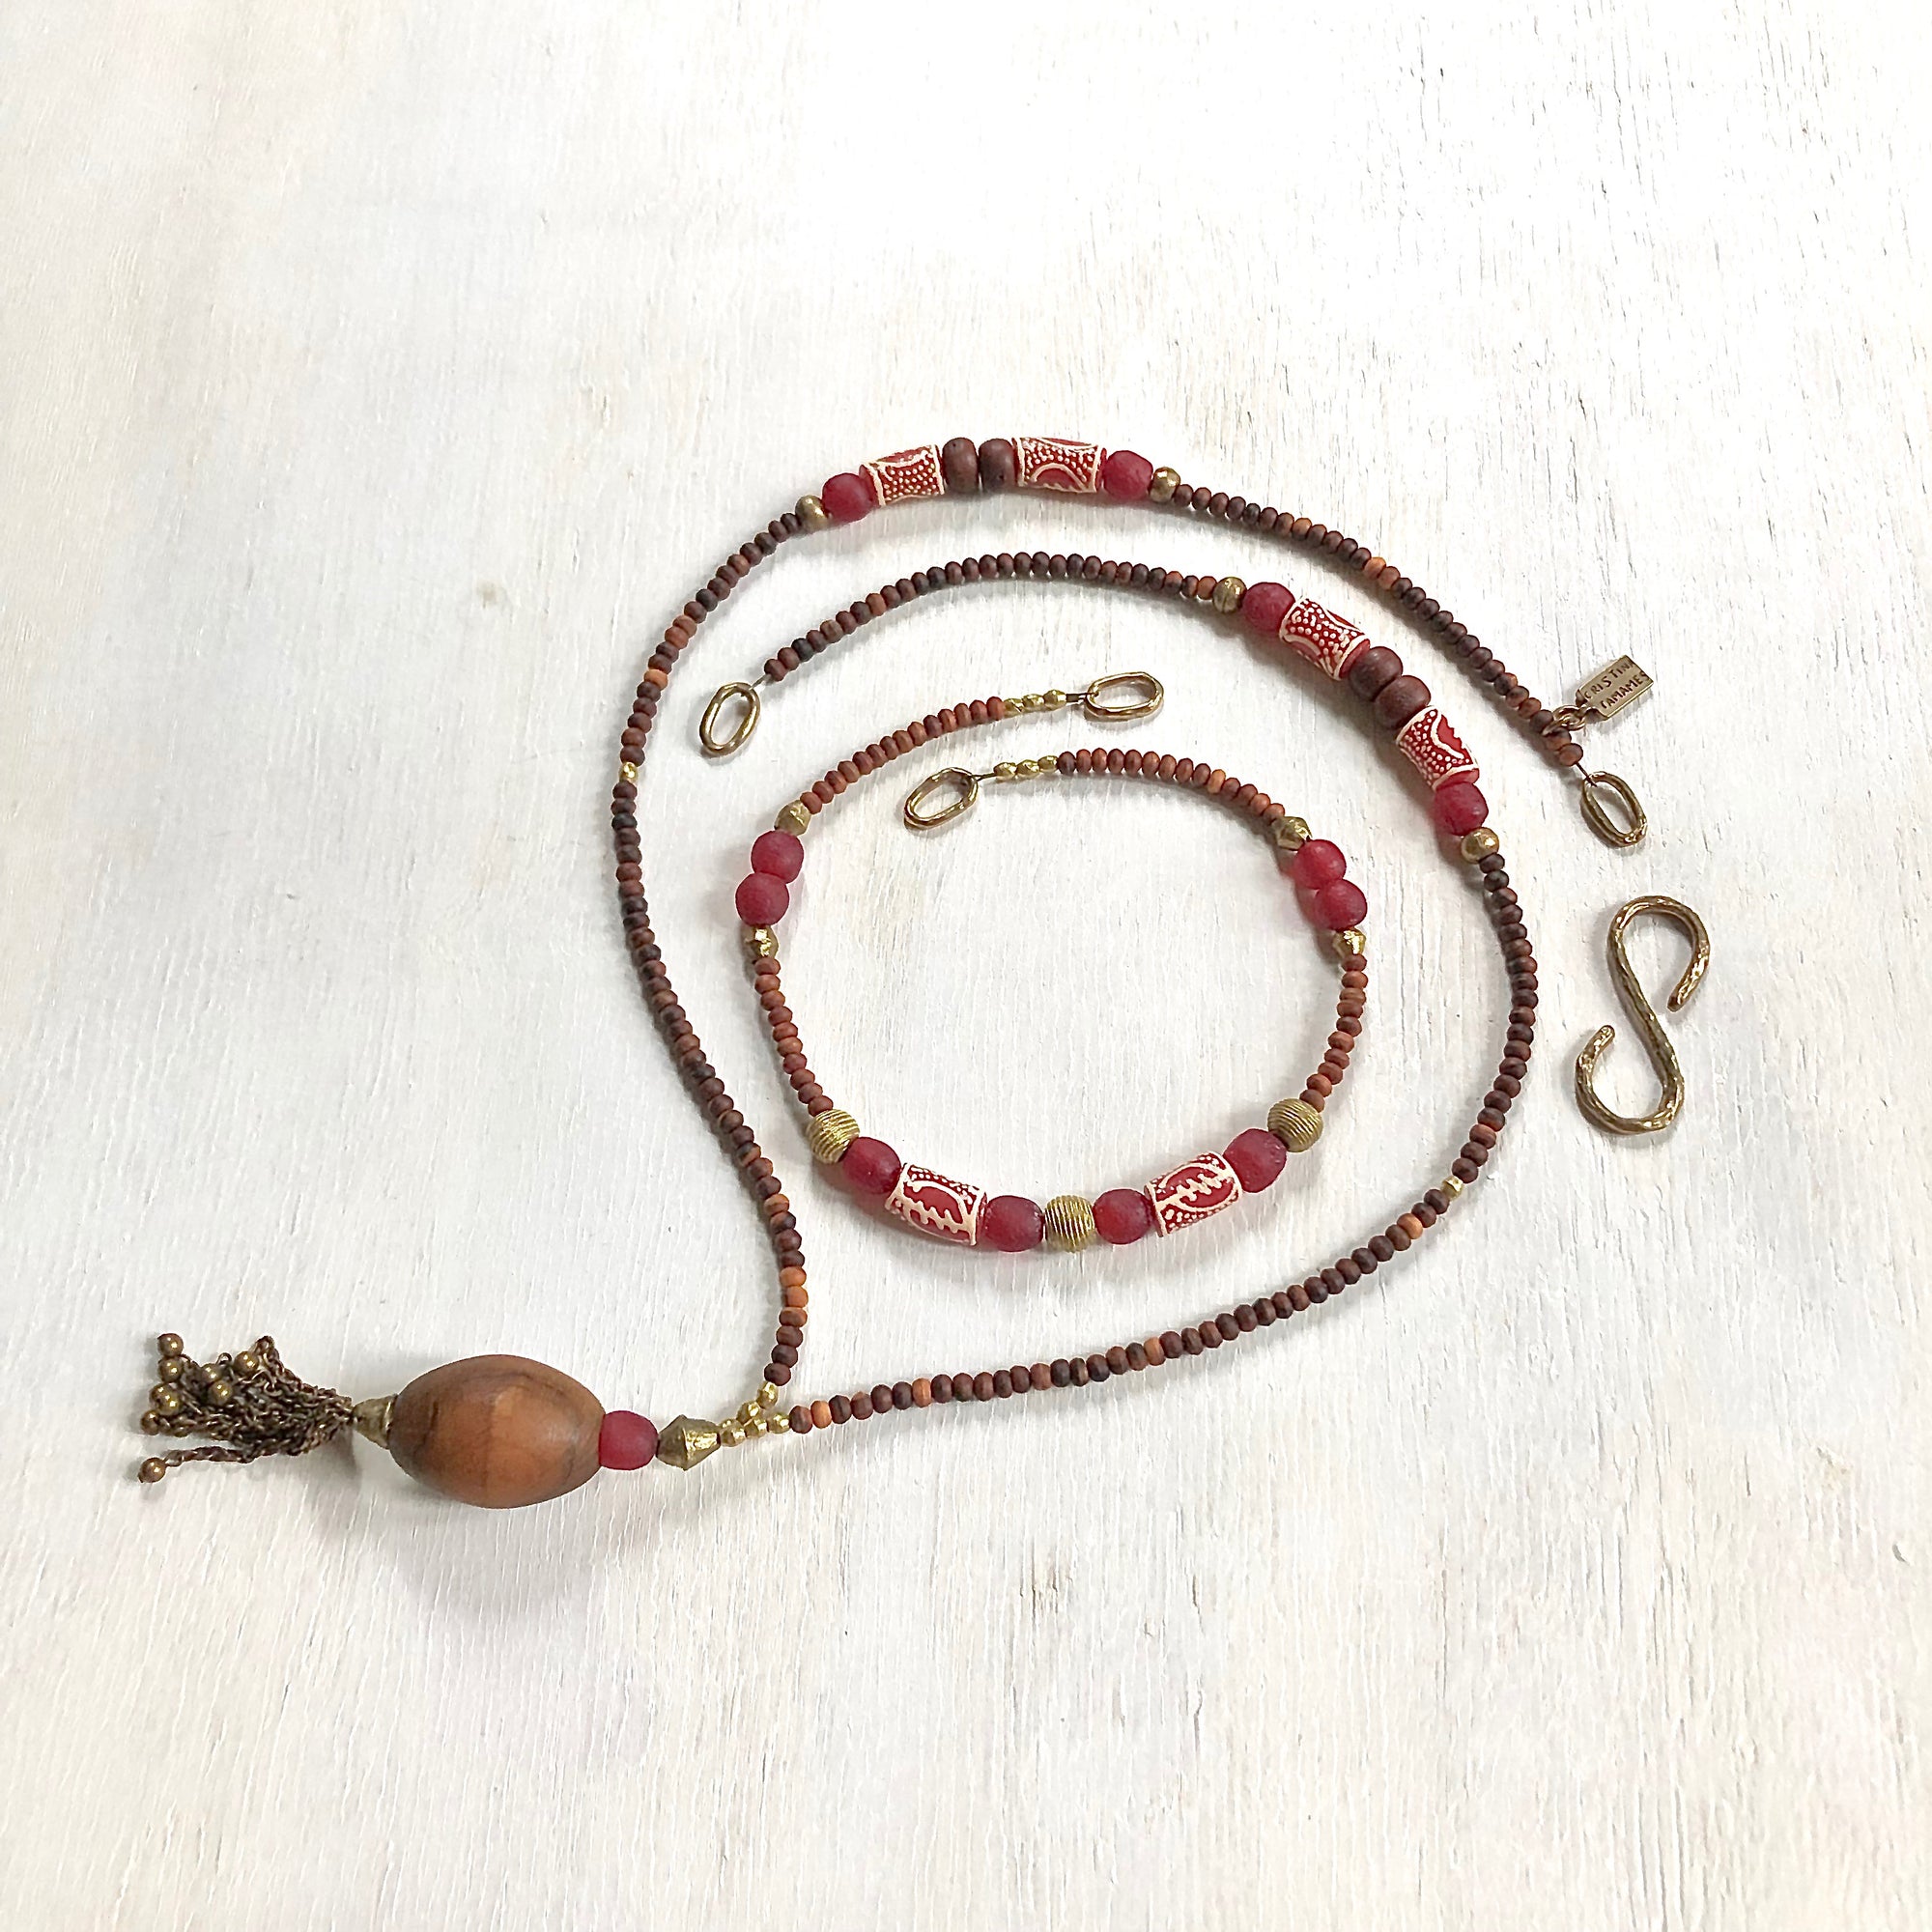 Hand painted red Adinkra African beads with vintage olive wood pendant long necklace. Cristina Tamames Jewelry Designer